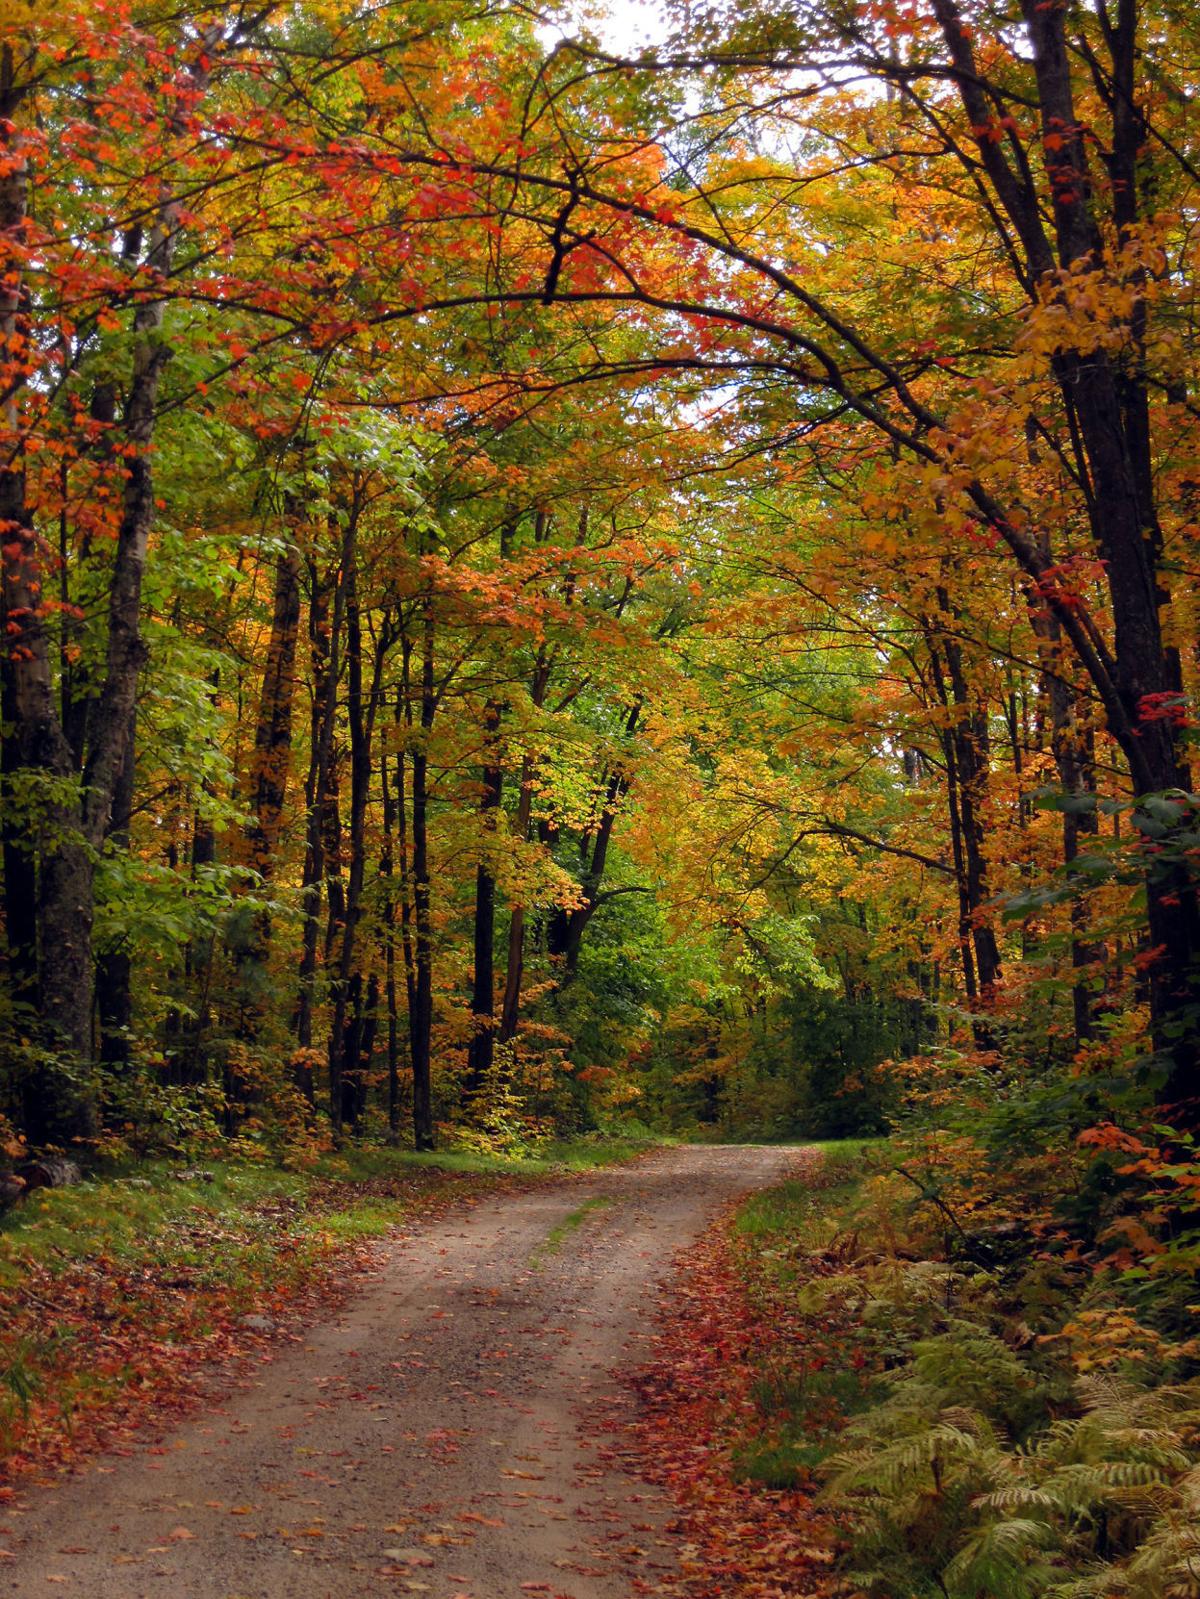 Visit Minnesota state forests for fall color driving tours | Hutchinson